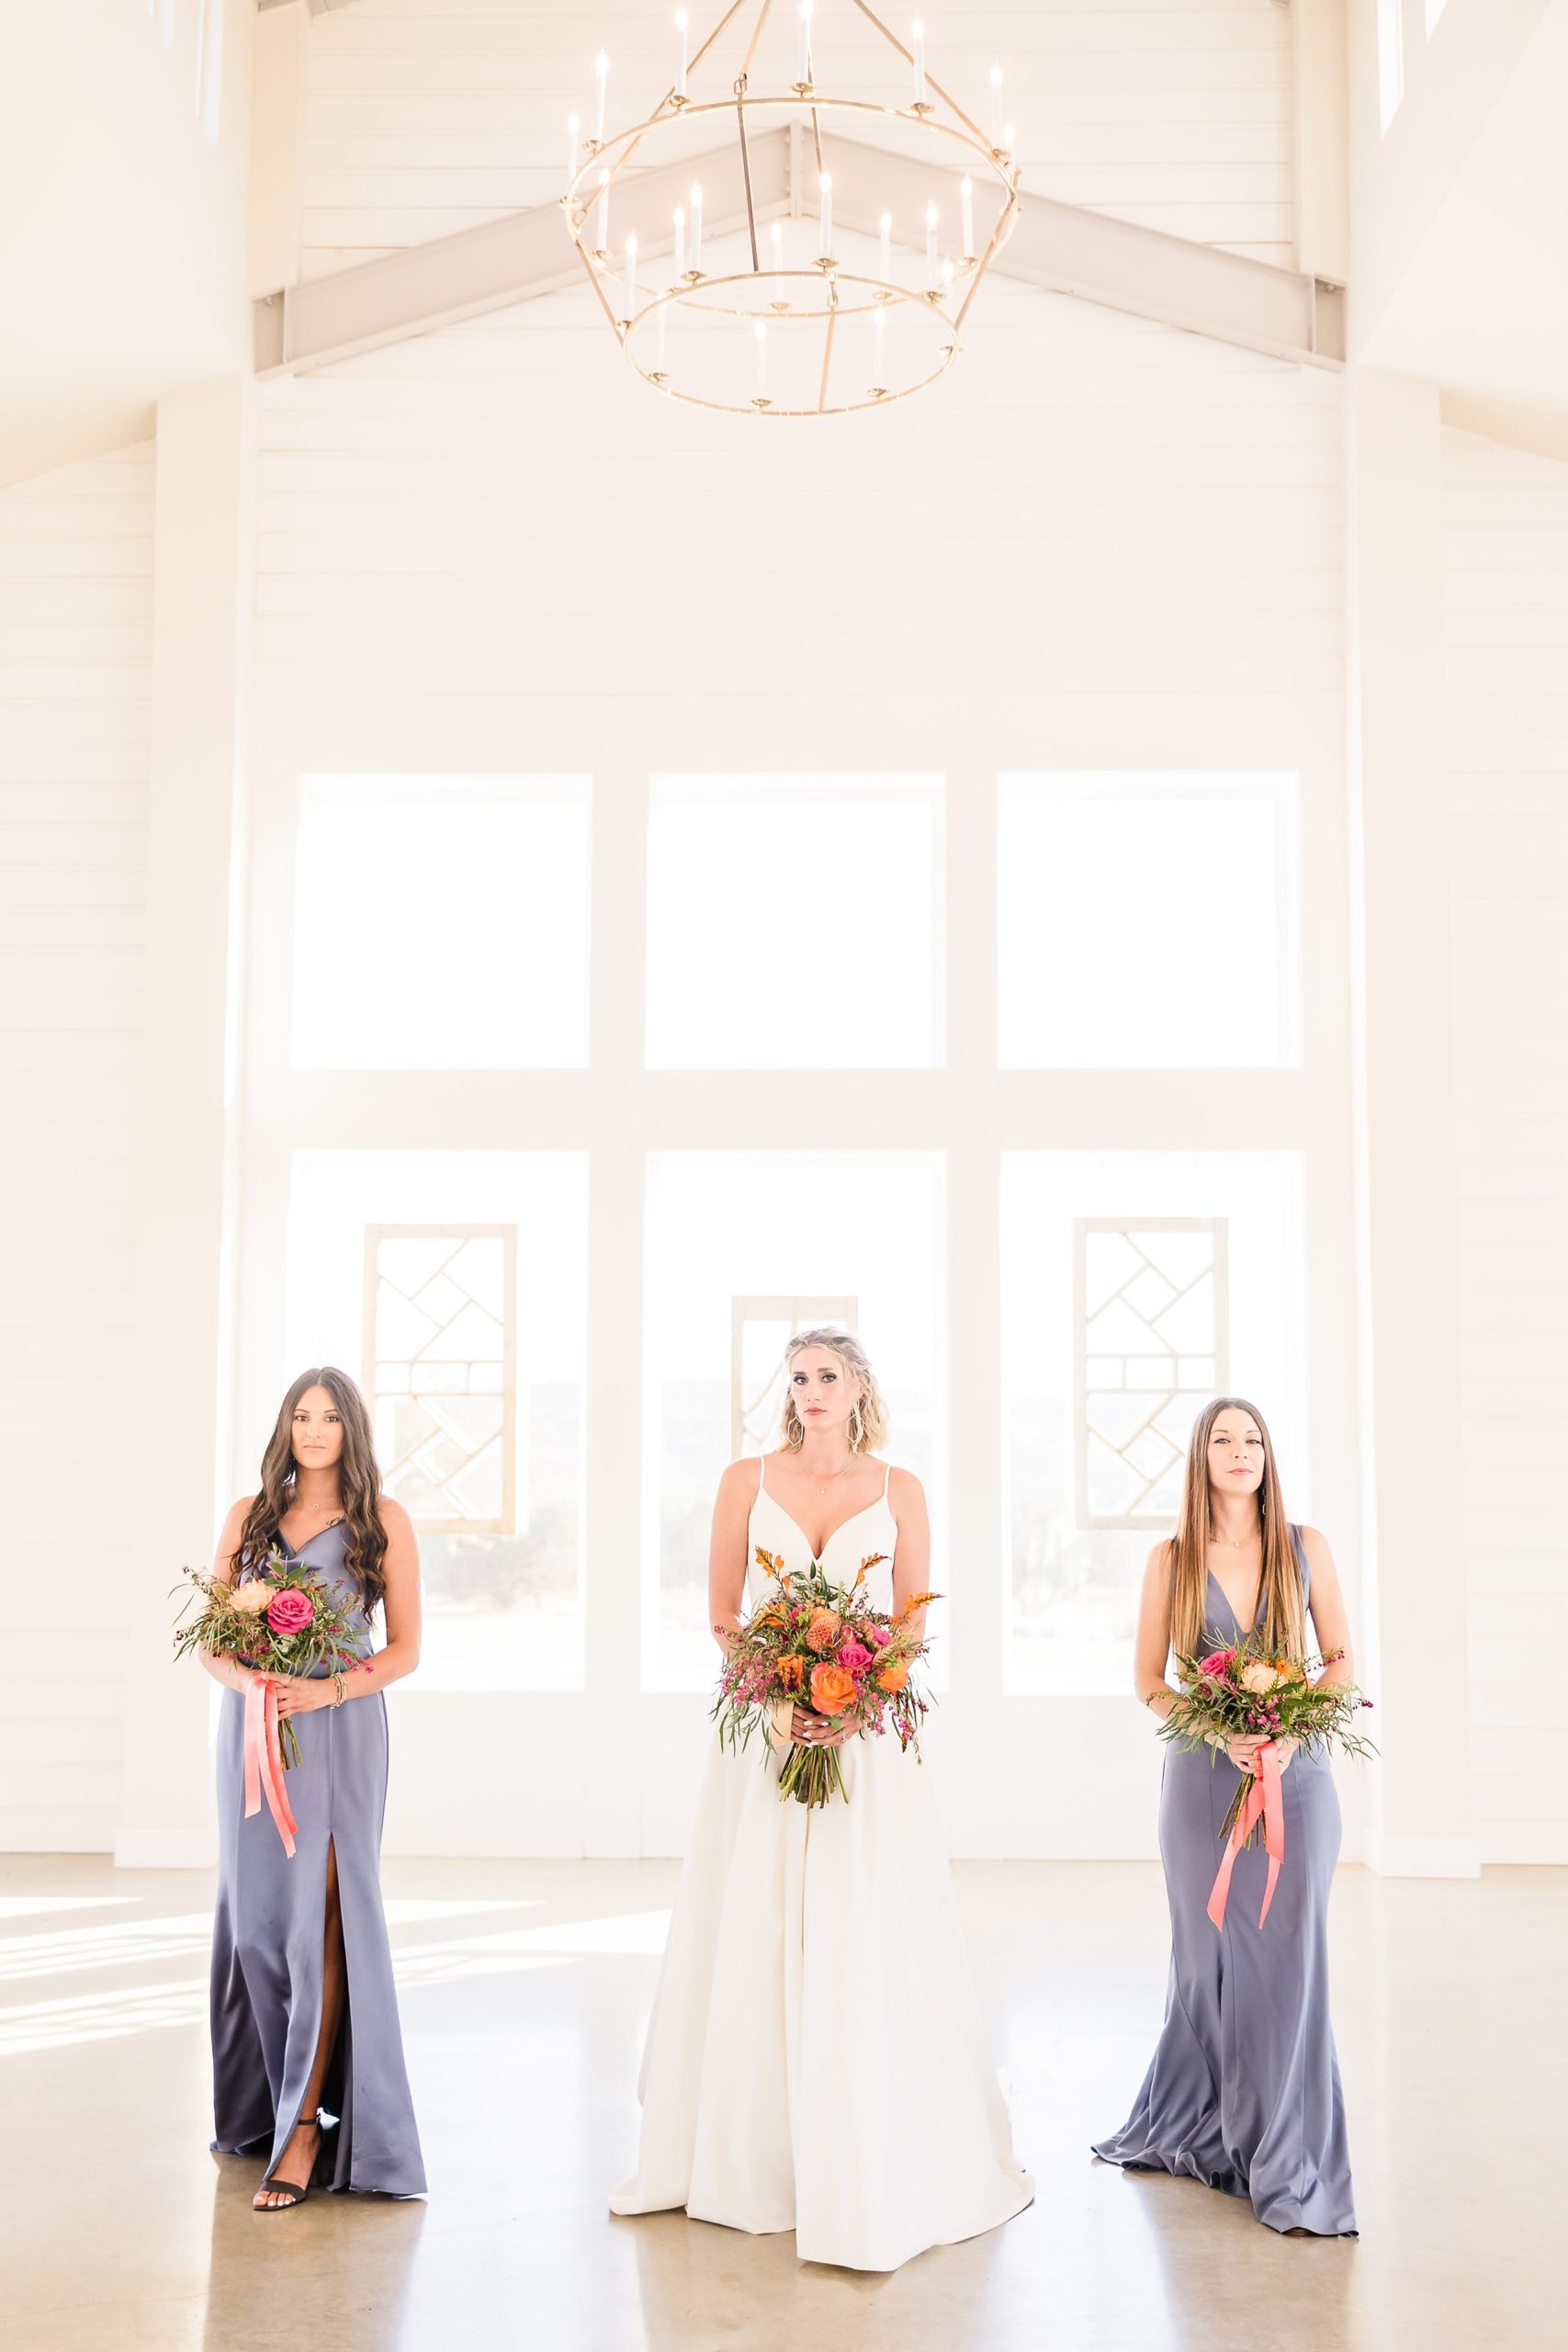 Bride and Bridesmaids at the Camp Hideaway Retreat wedding venue in Fredericksburg, Texas. Photograph taken by Austin wedding photographers, Joanna and Brett Photography.